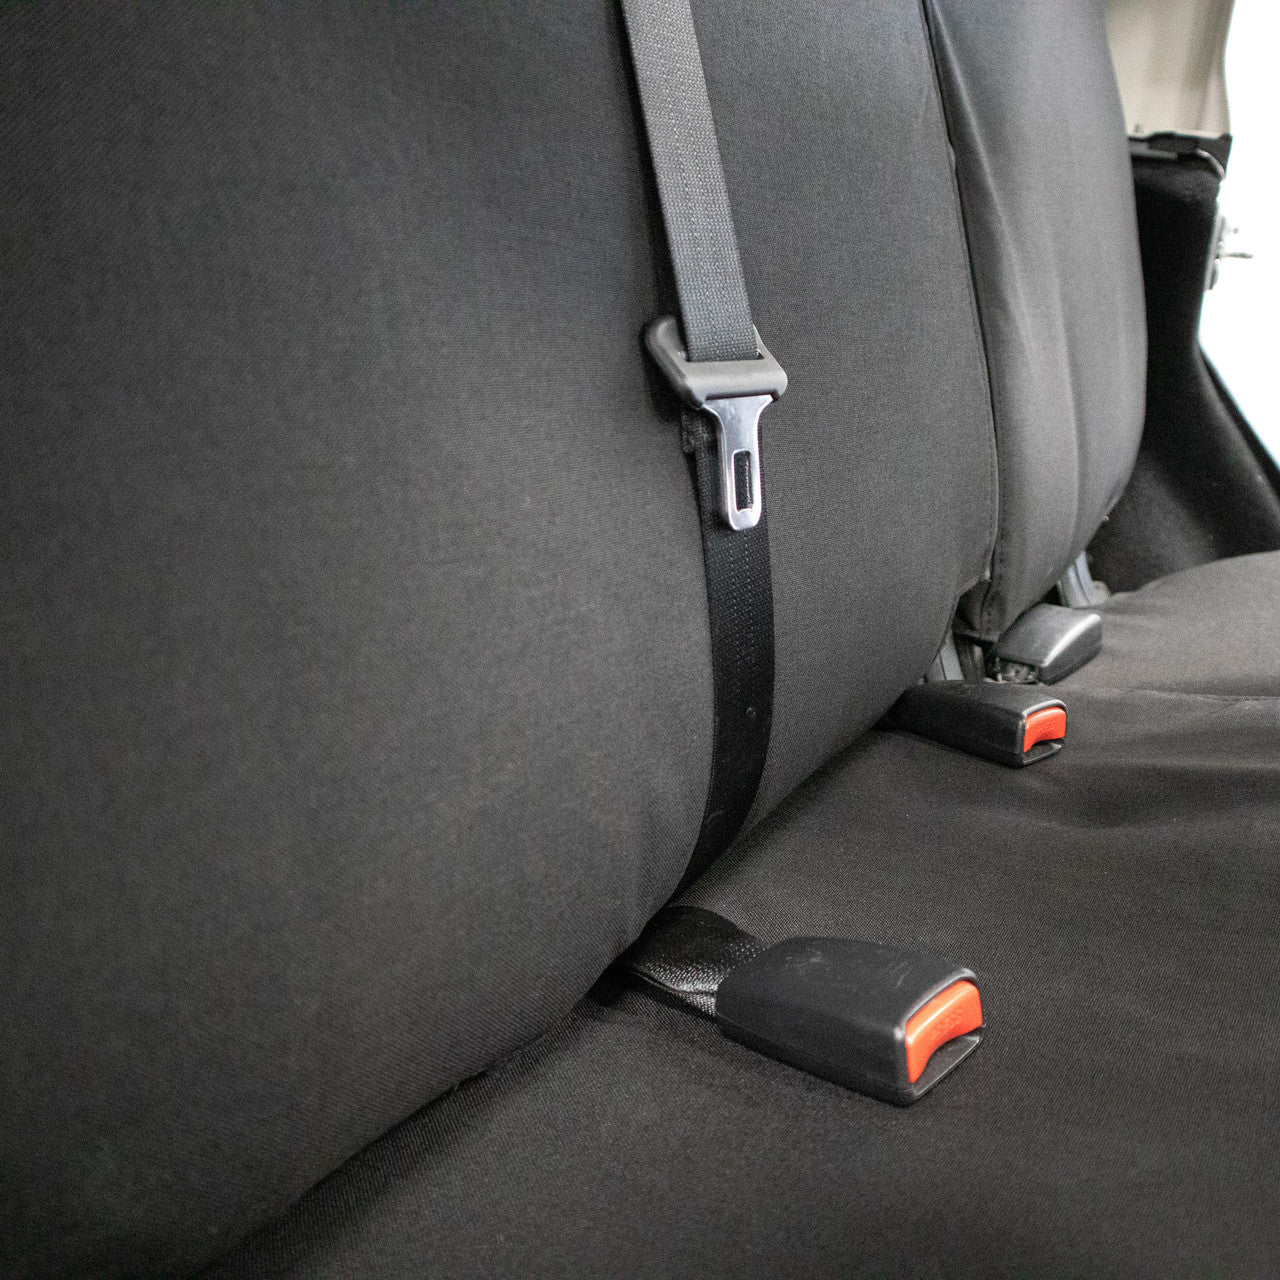 Jeep Wrangler JKU Rear Antimicrobial Seat Covers (ST75513)